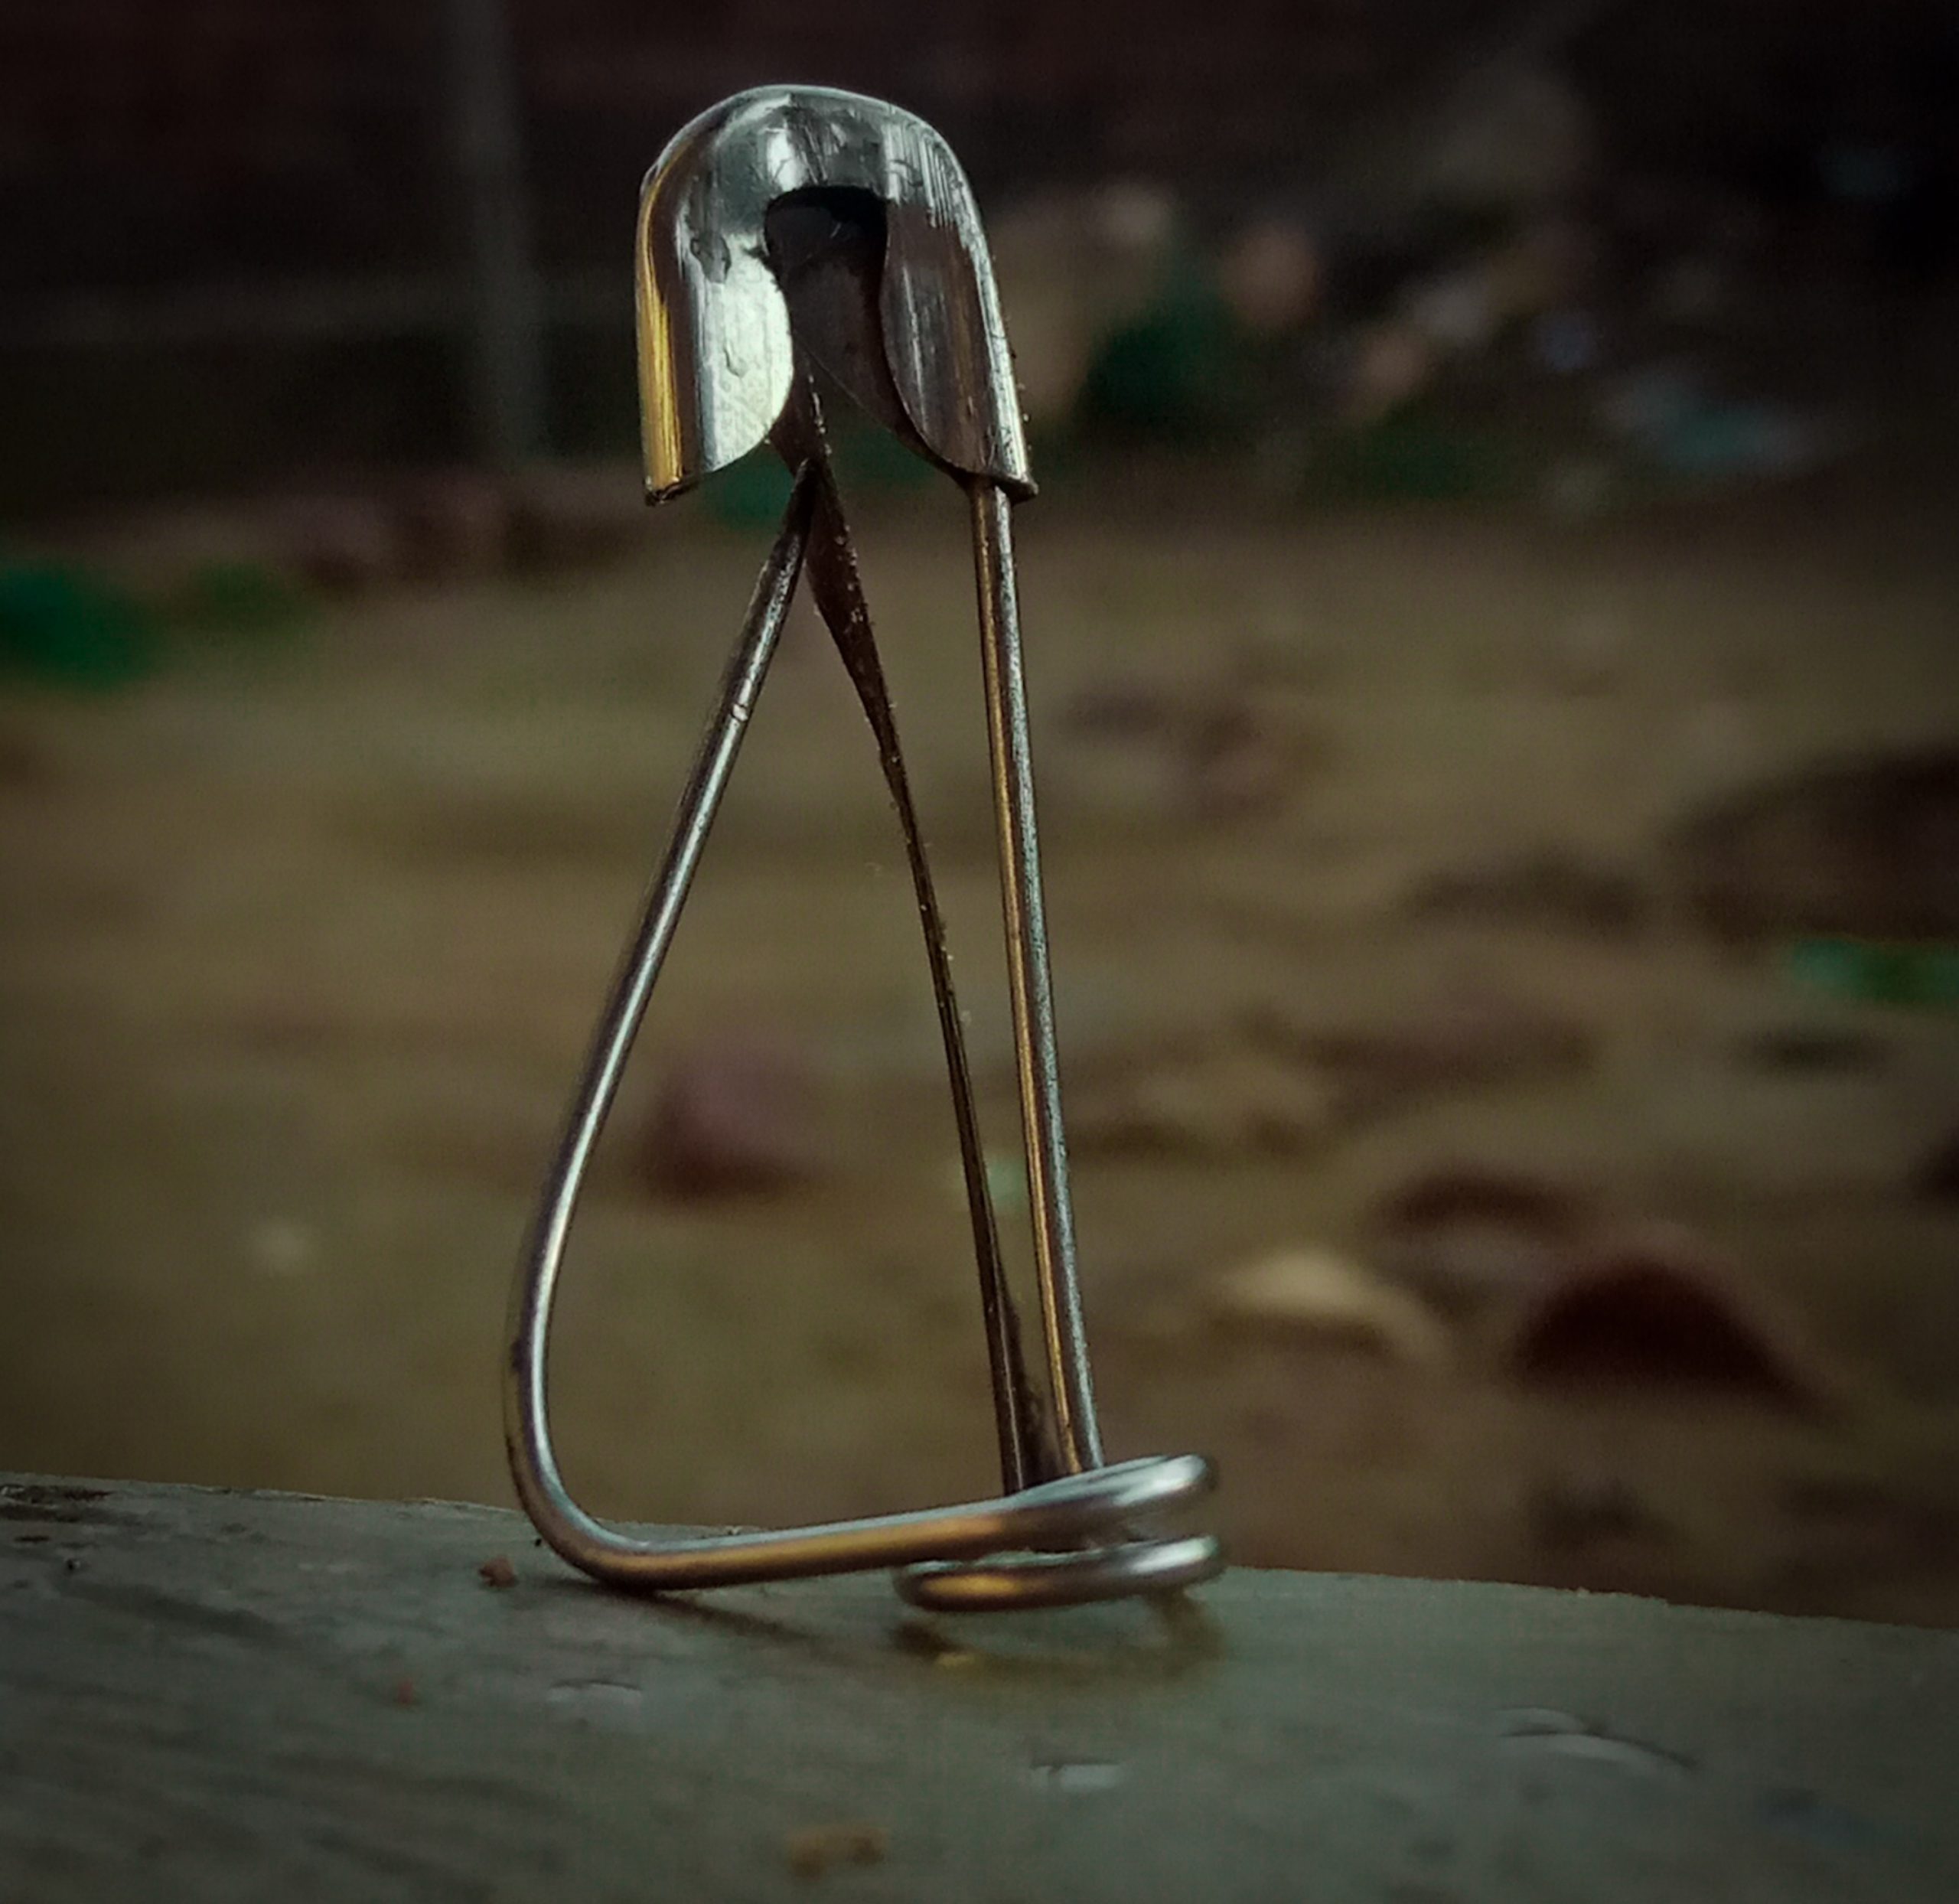 A safety pin